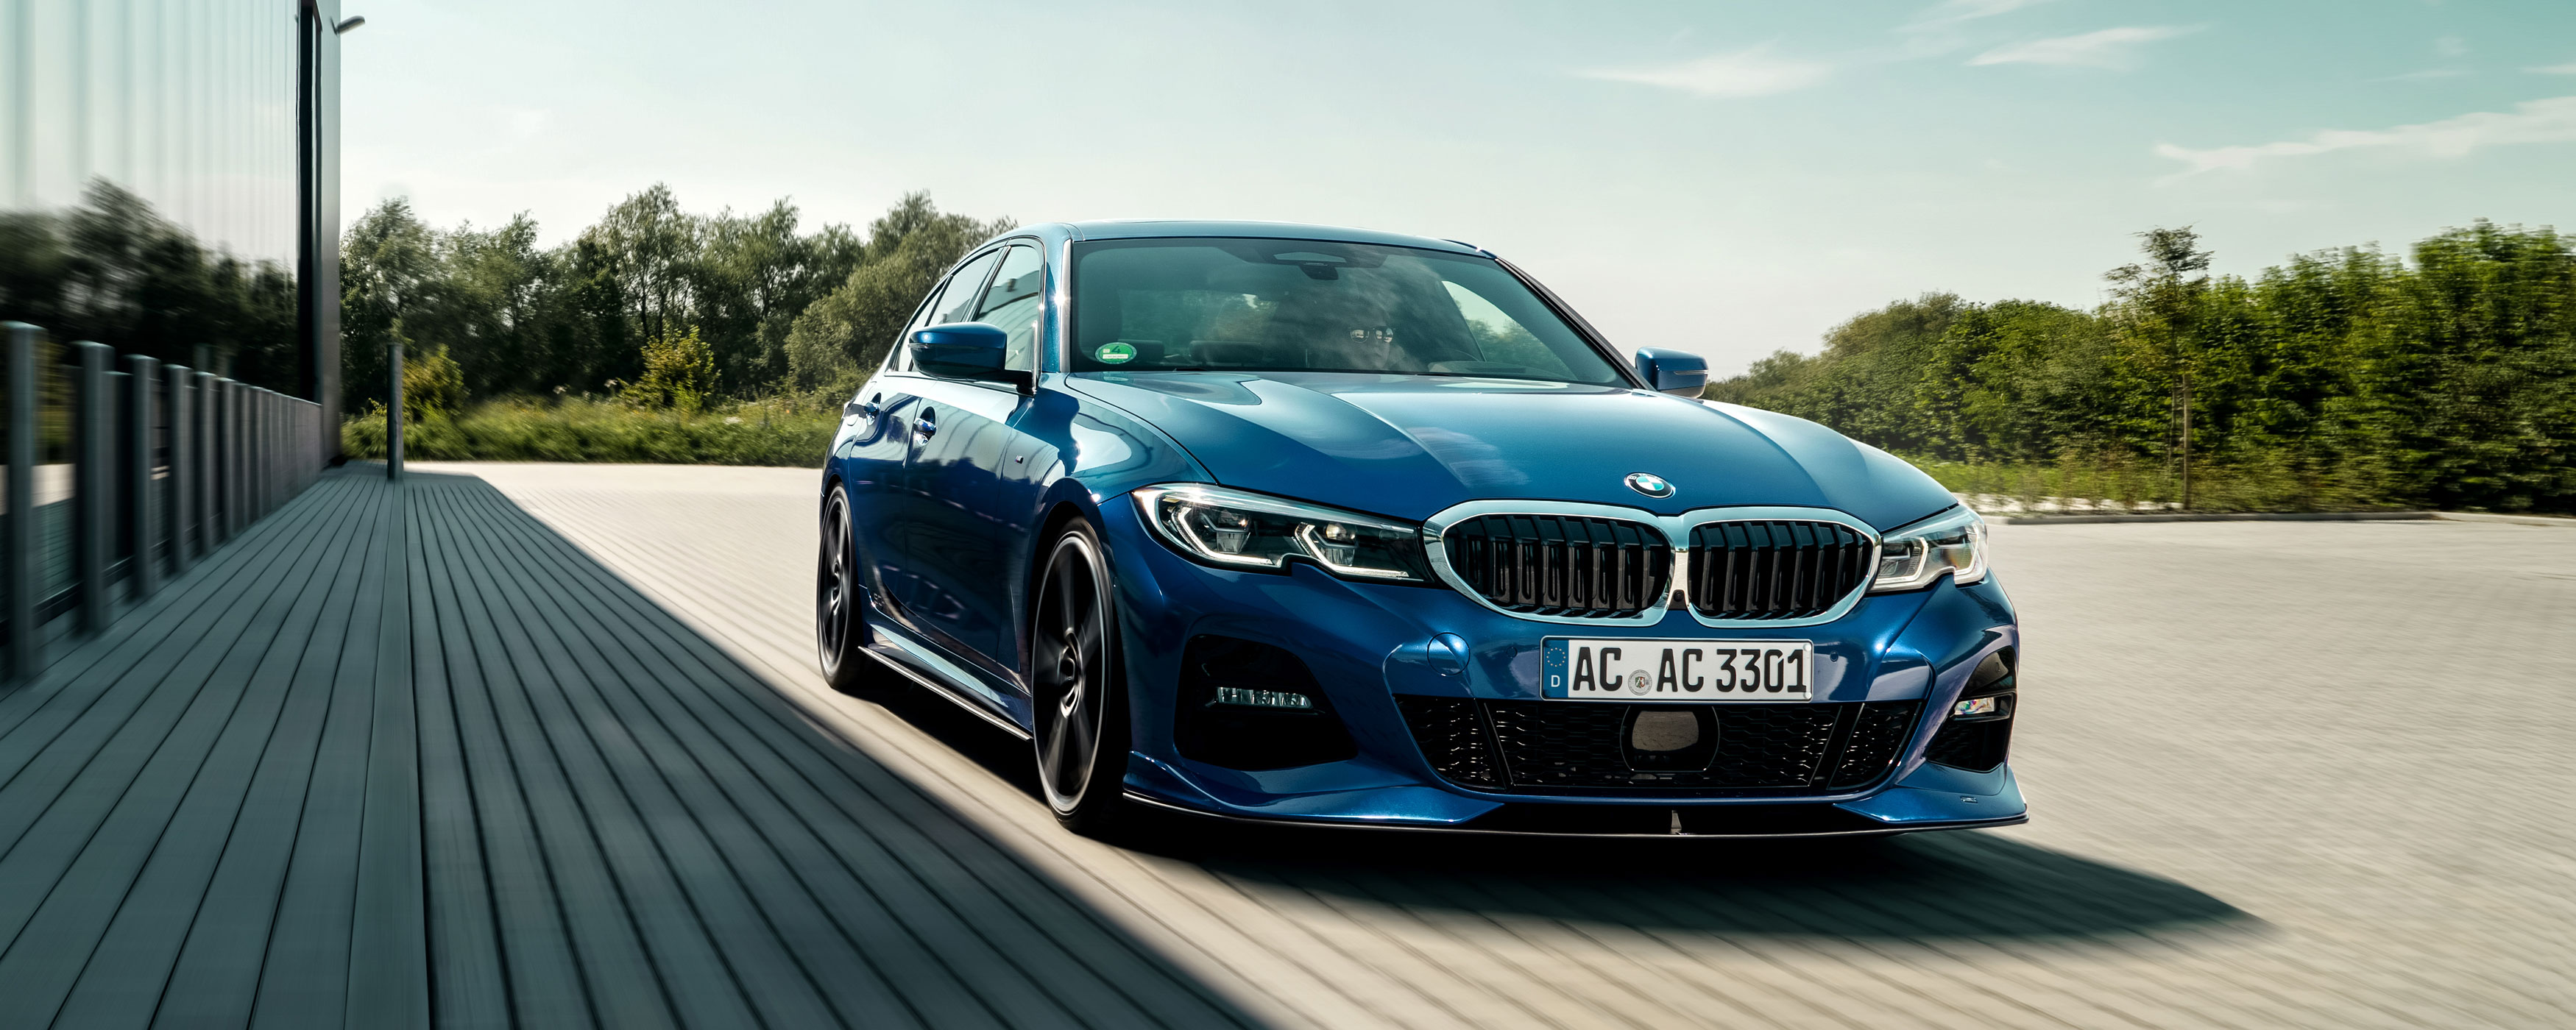 AC Schnitzer Gives G20 3-Series BMW M-Like Looks, Sports Suspension